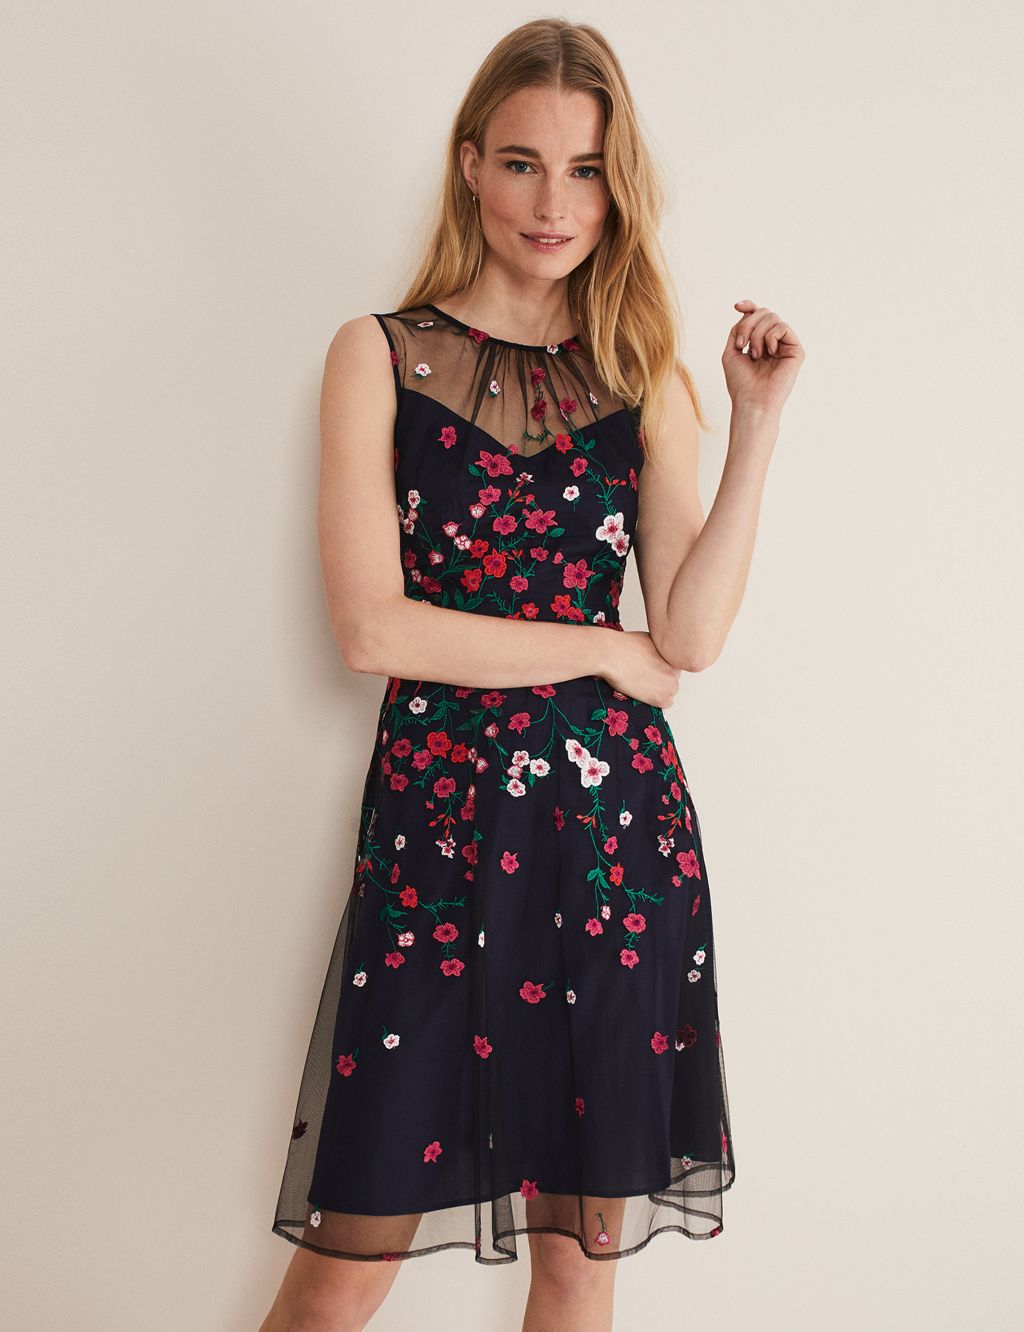 Ditsy Floral Round Neck Mini Waisted Dress image 1